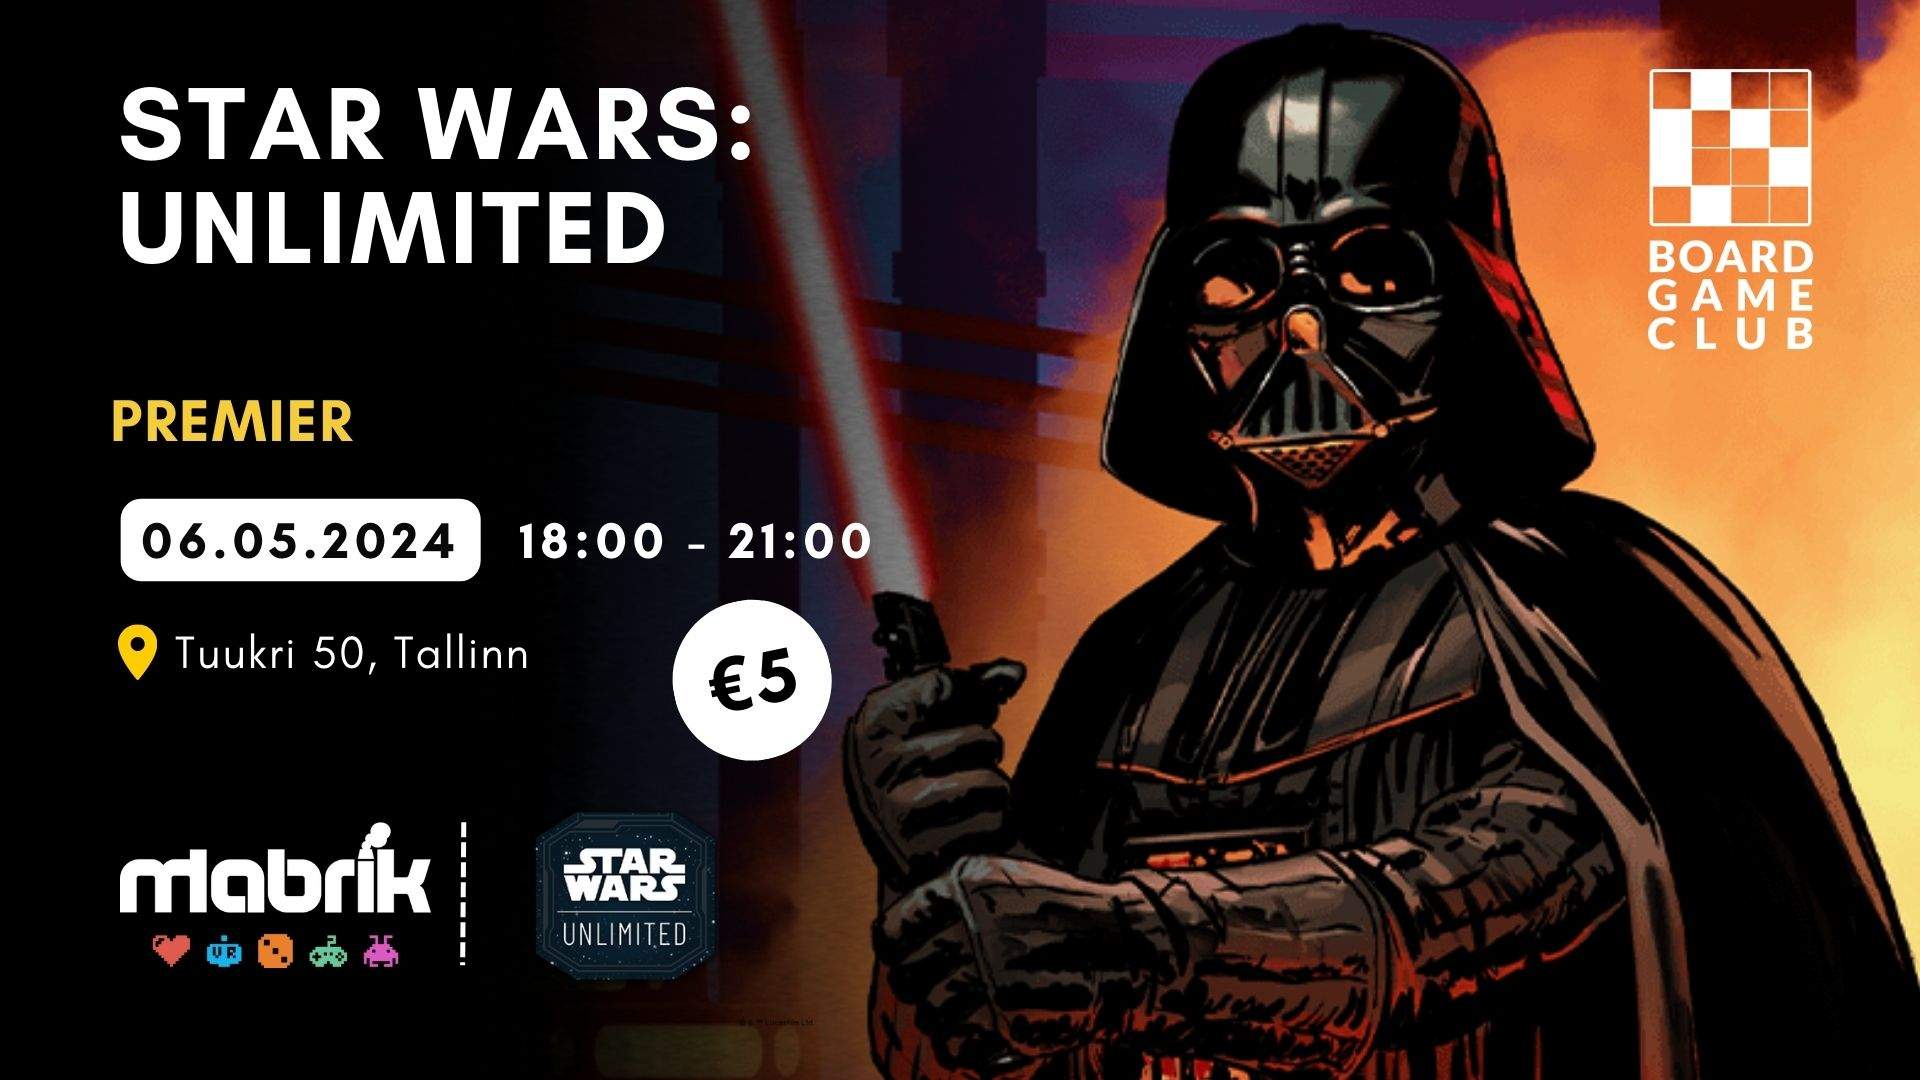 Events - 06.05.2024 - Star Wars: Unlimited - Premier